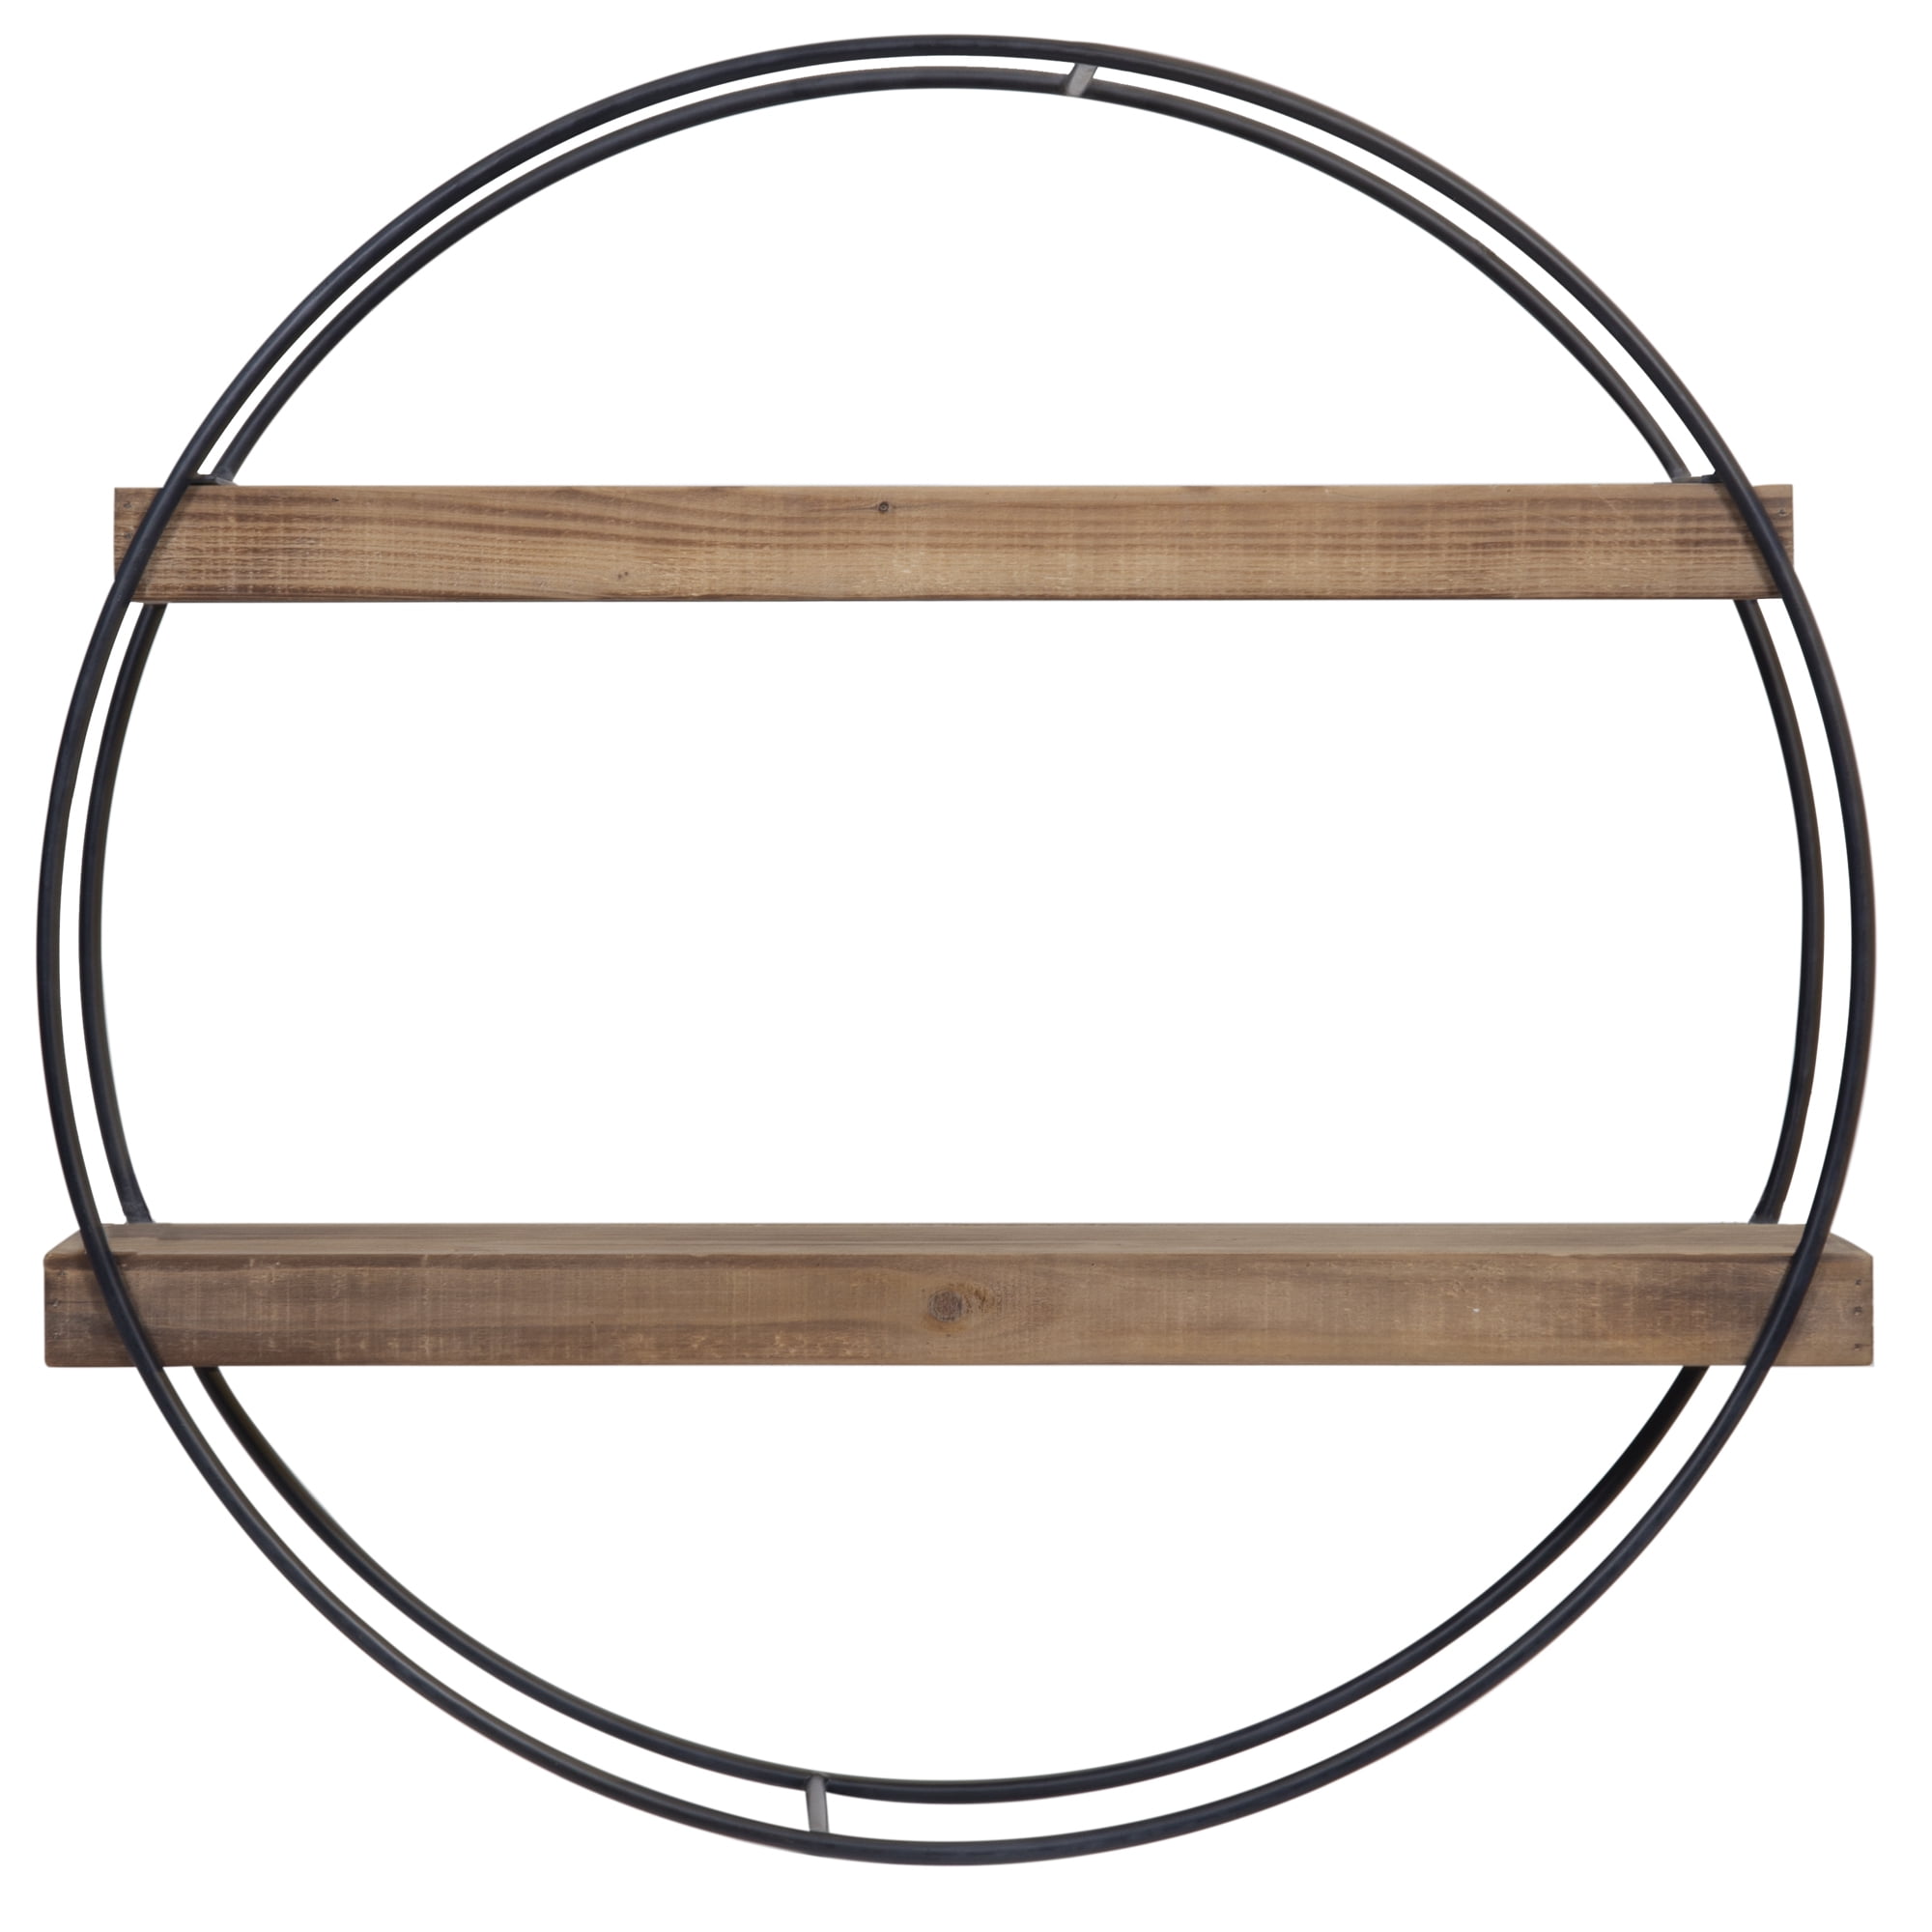 Rustic Industrial Large Metal Round 2 Wood Plank Wall Shelf Suspended Bar 